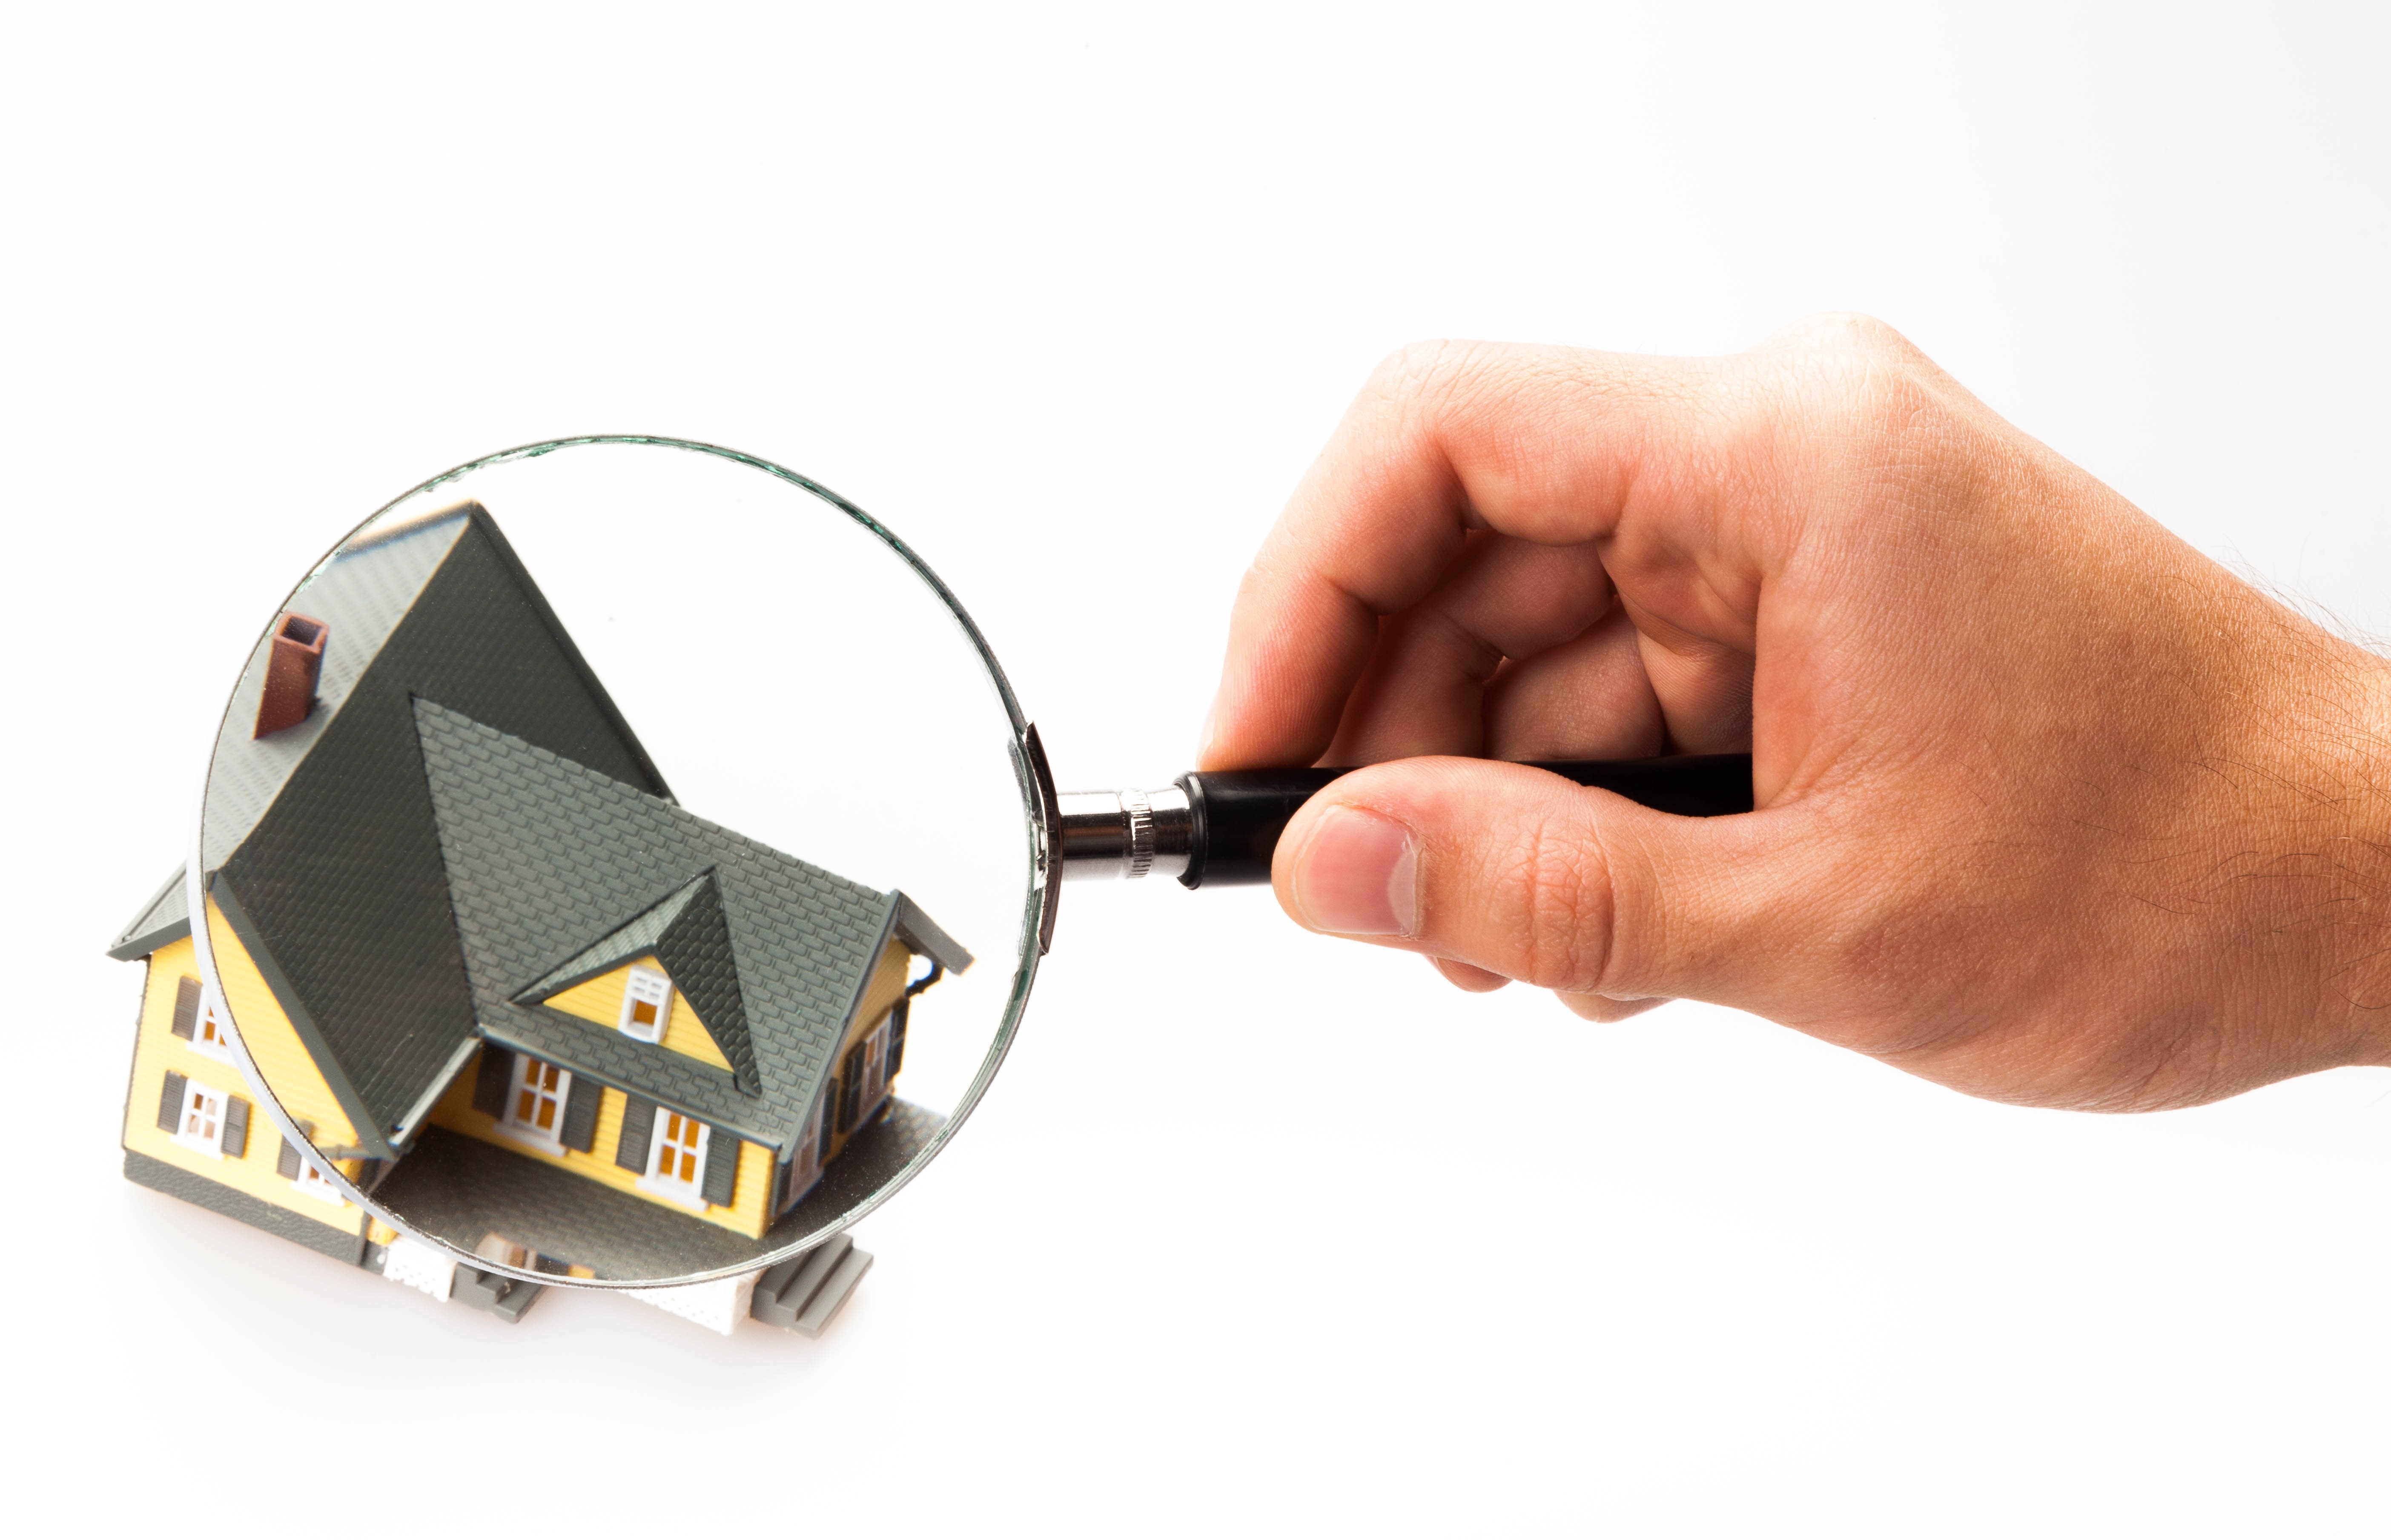 the appraisal is a key part of the home purchase and home sale